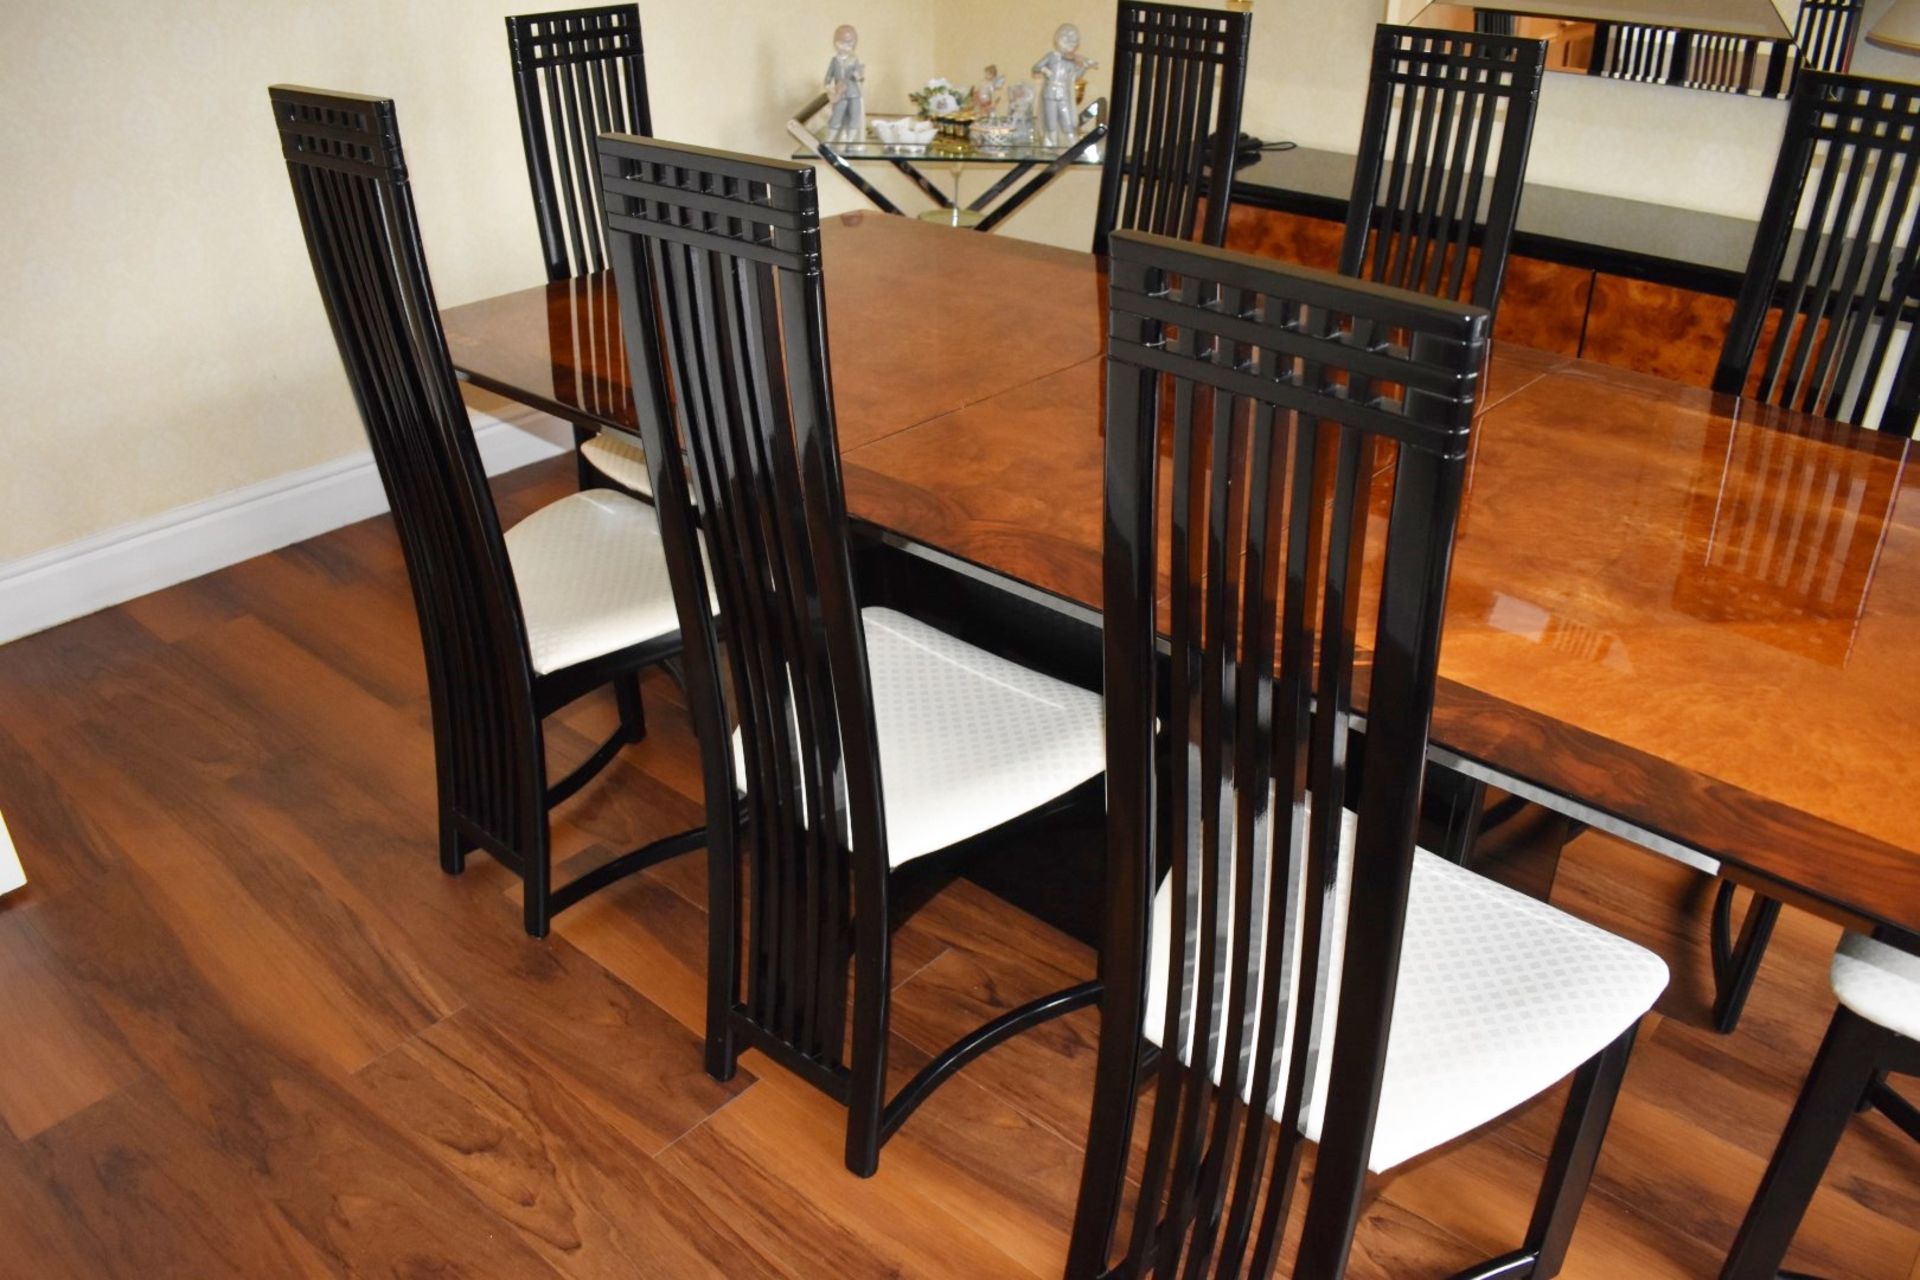 8 x High Back Dining Chairs - Set of Eight Elegant High Back Oriental Style Chairs With Black Finish - Image 8 of 11